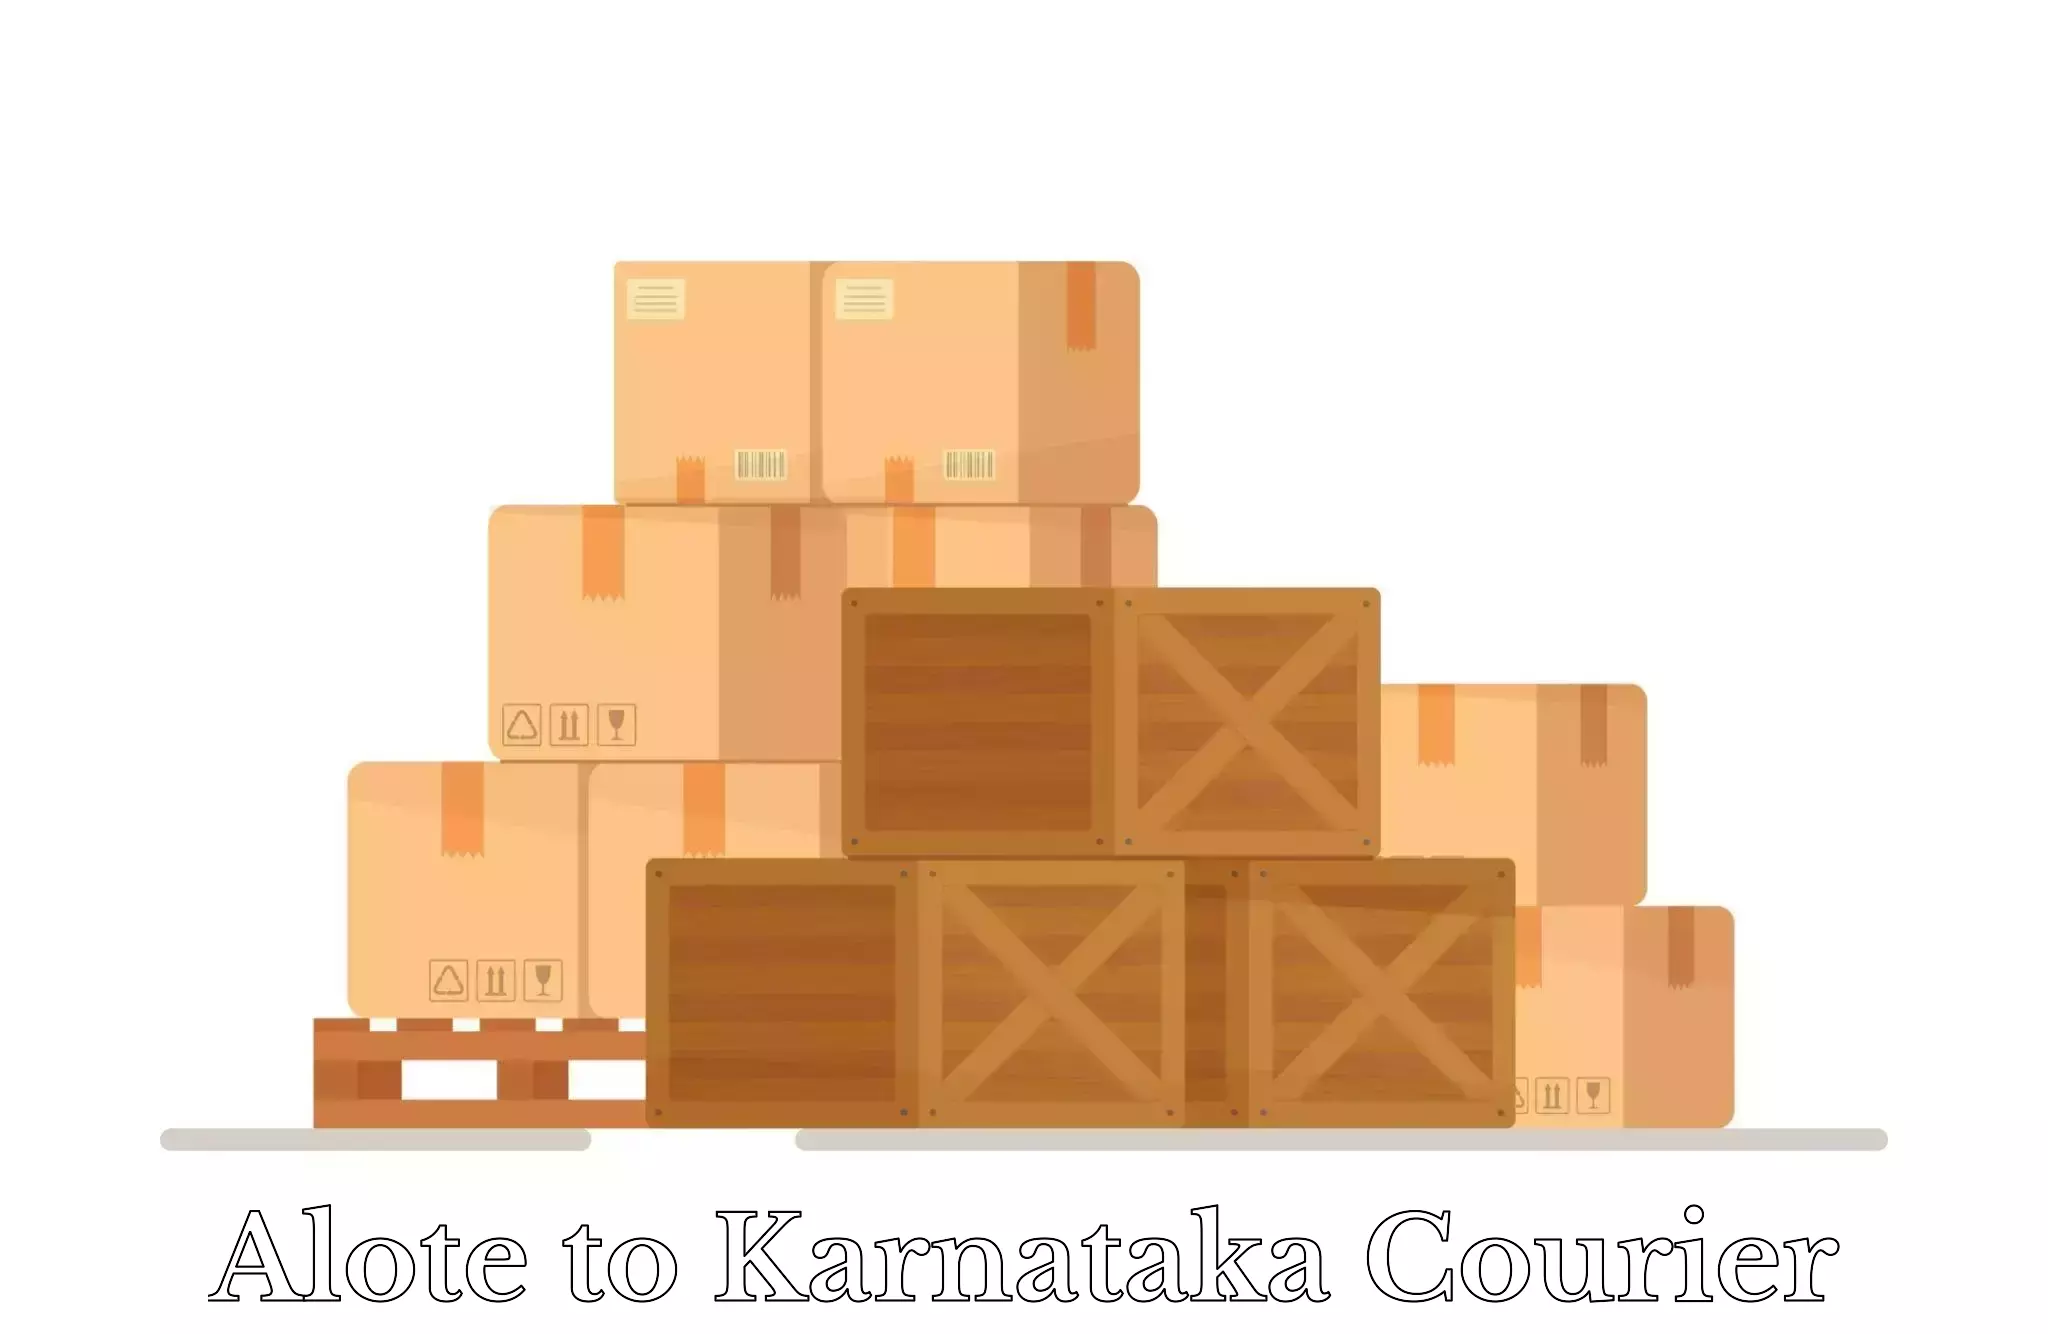 Airport luggage delivery in Alote to Karnataka